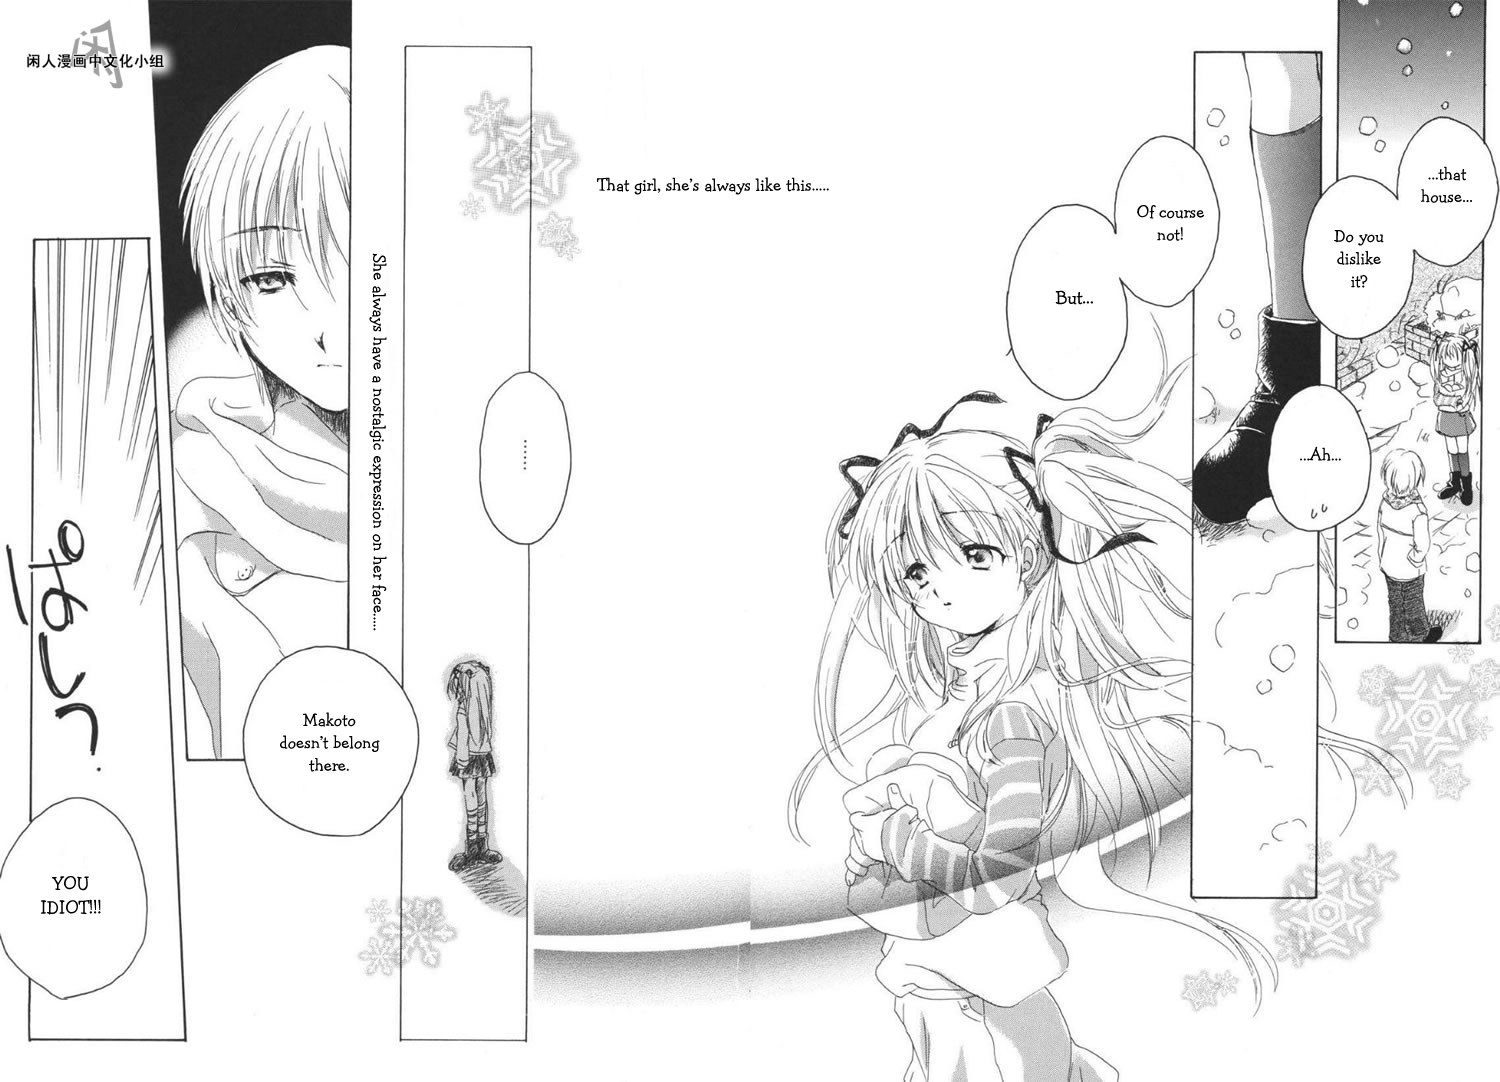 Kanon and Air Chapter 2